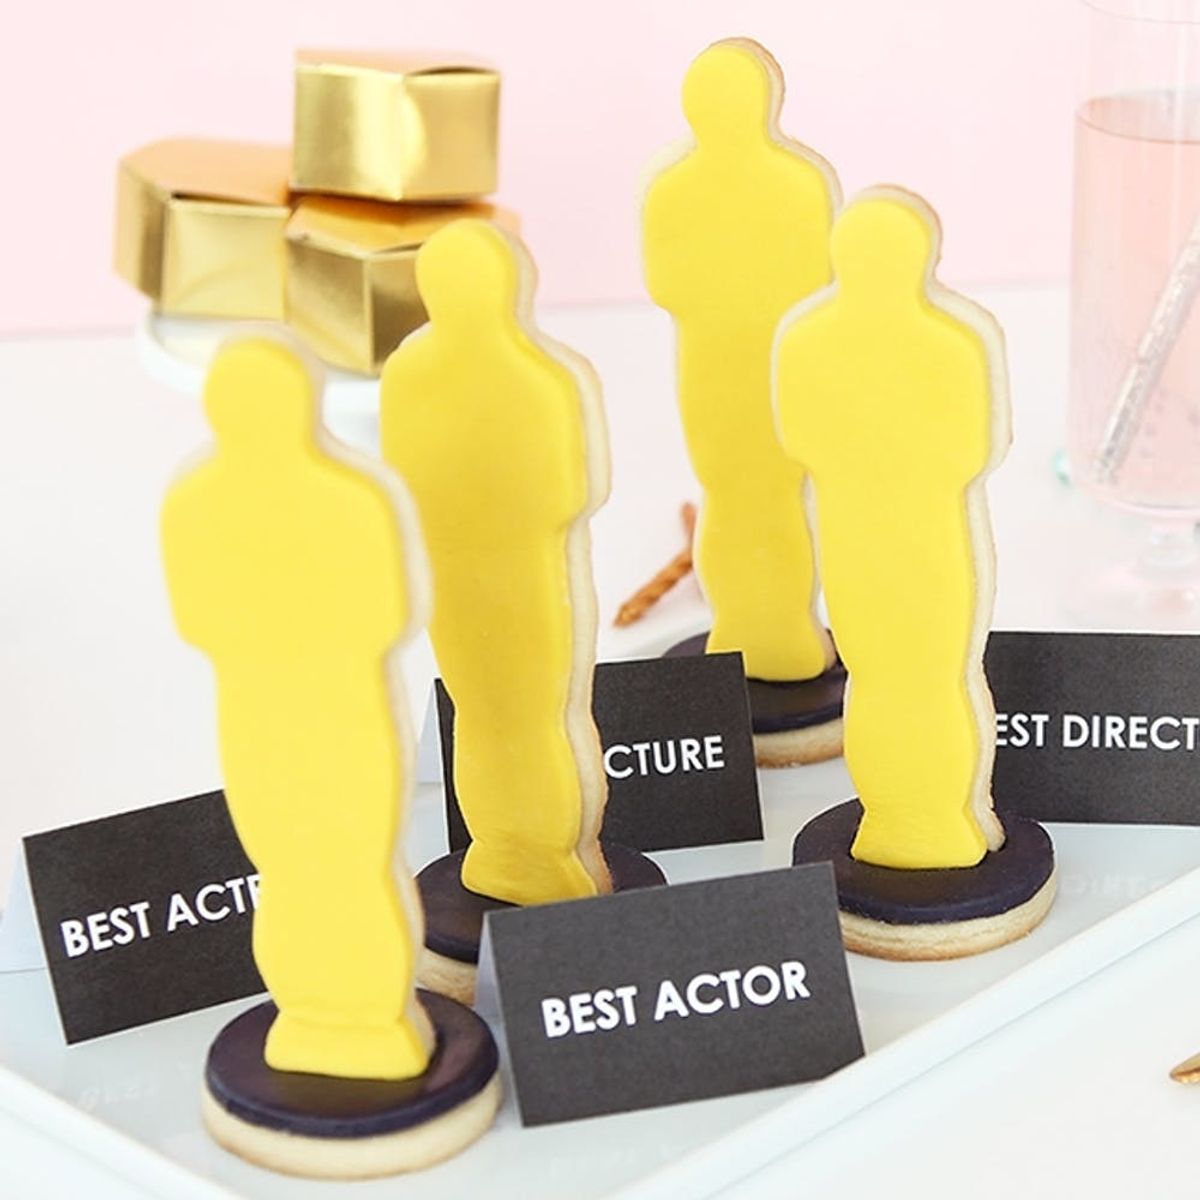 Make These 3D Oscar Award Cookies Recipe for Your Oscars Party